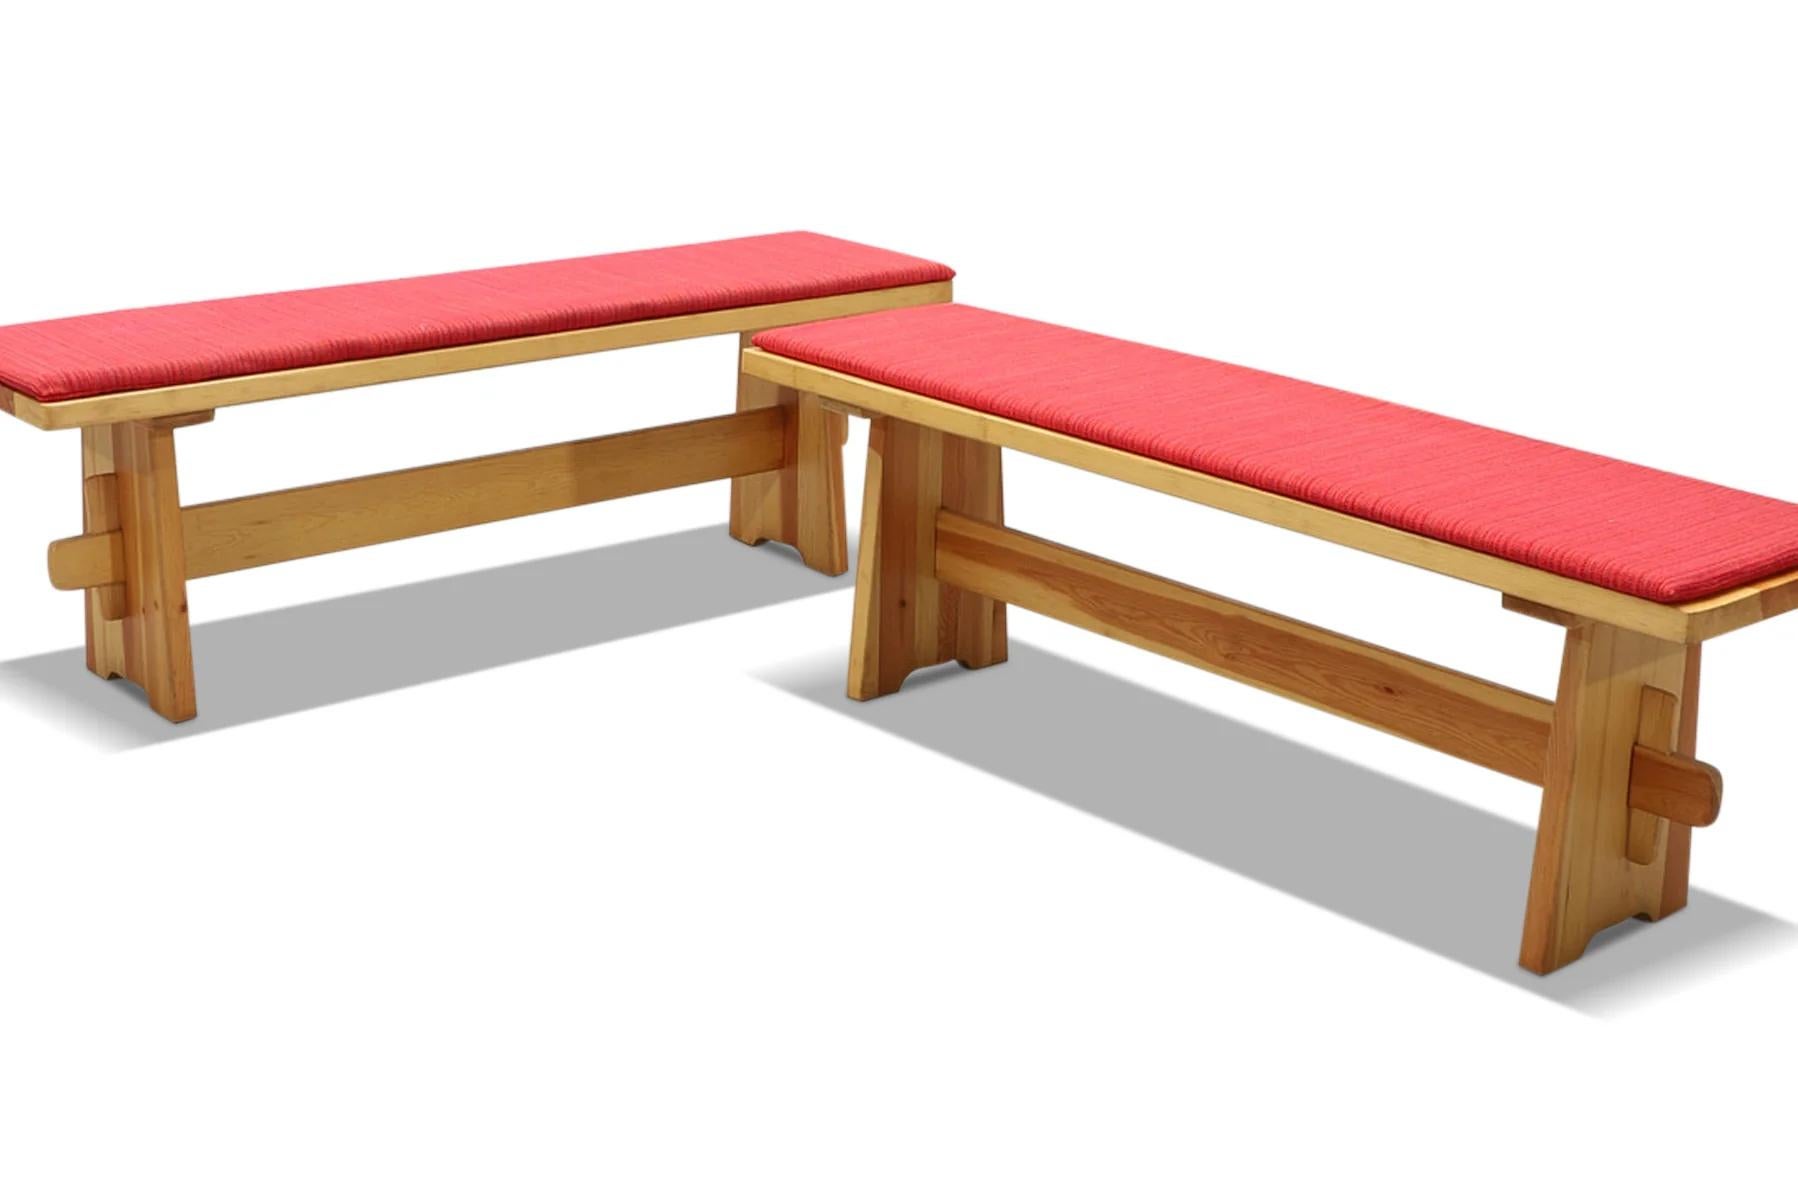 Swedish Pair of 1970s solid pine swedish benches #2 For Sale